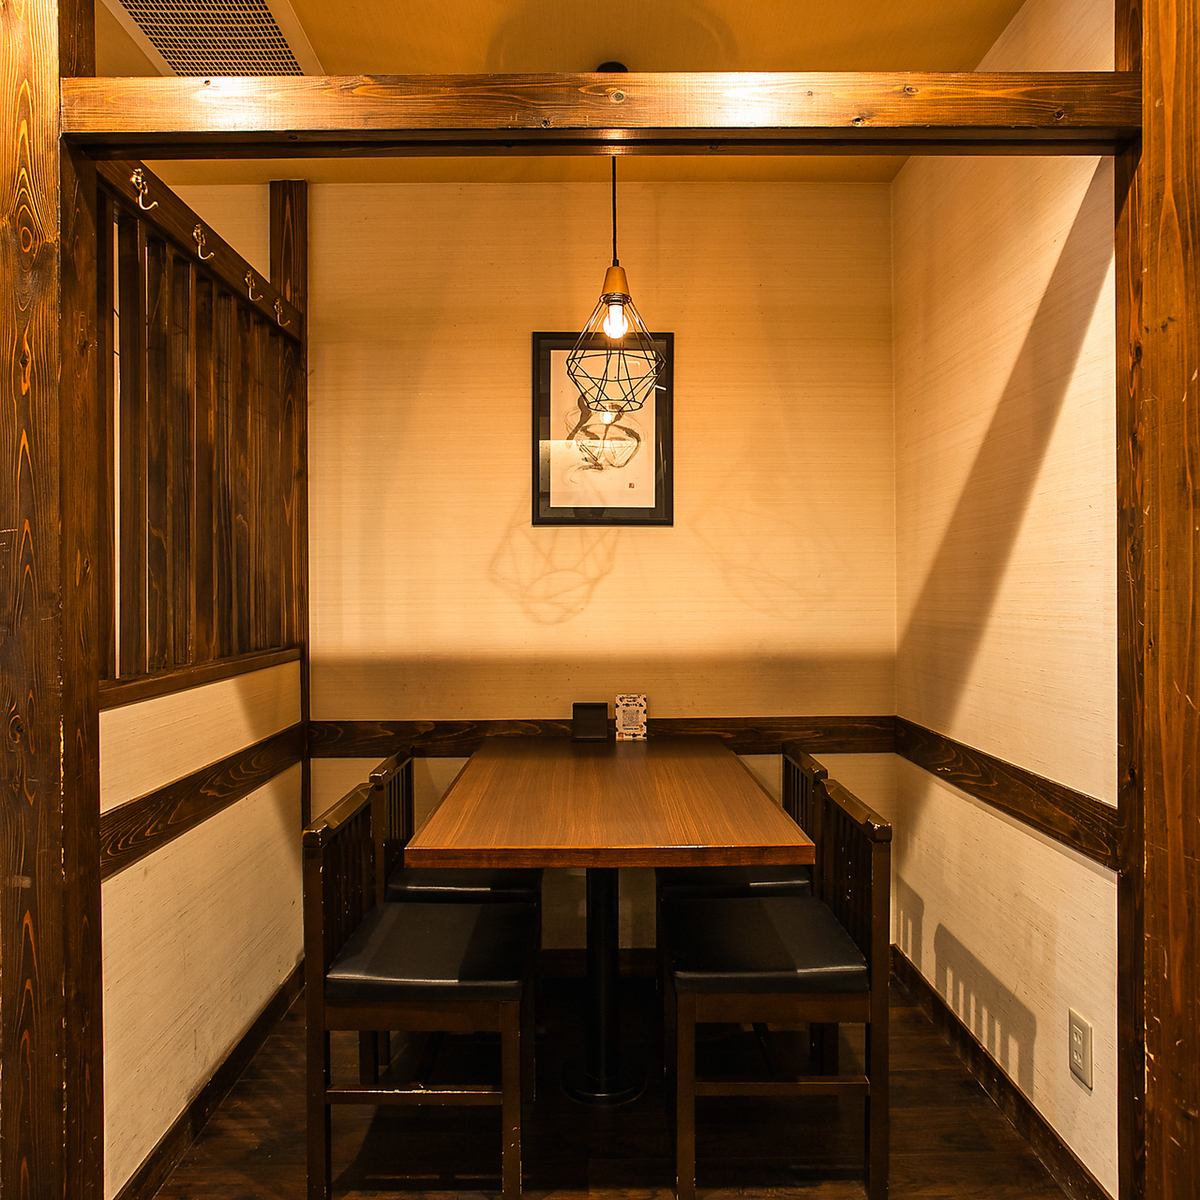 We have 4 semi-private rooms available.Make your reservation early as the seats are popular!